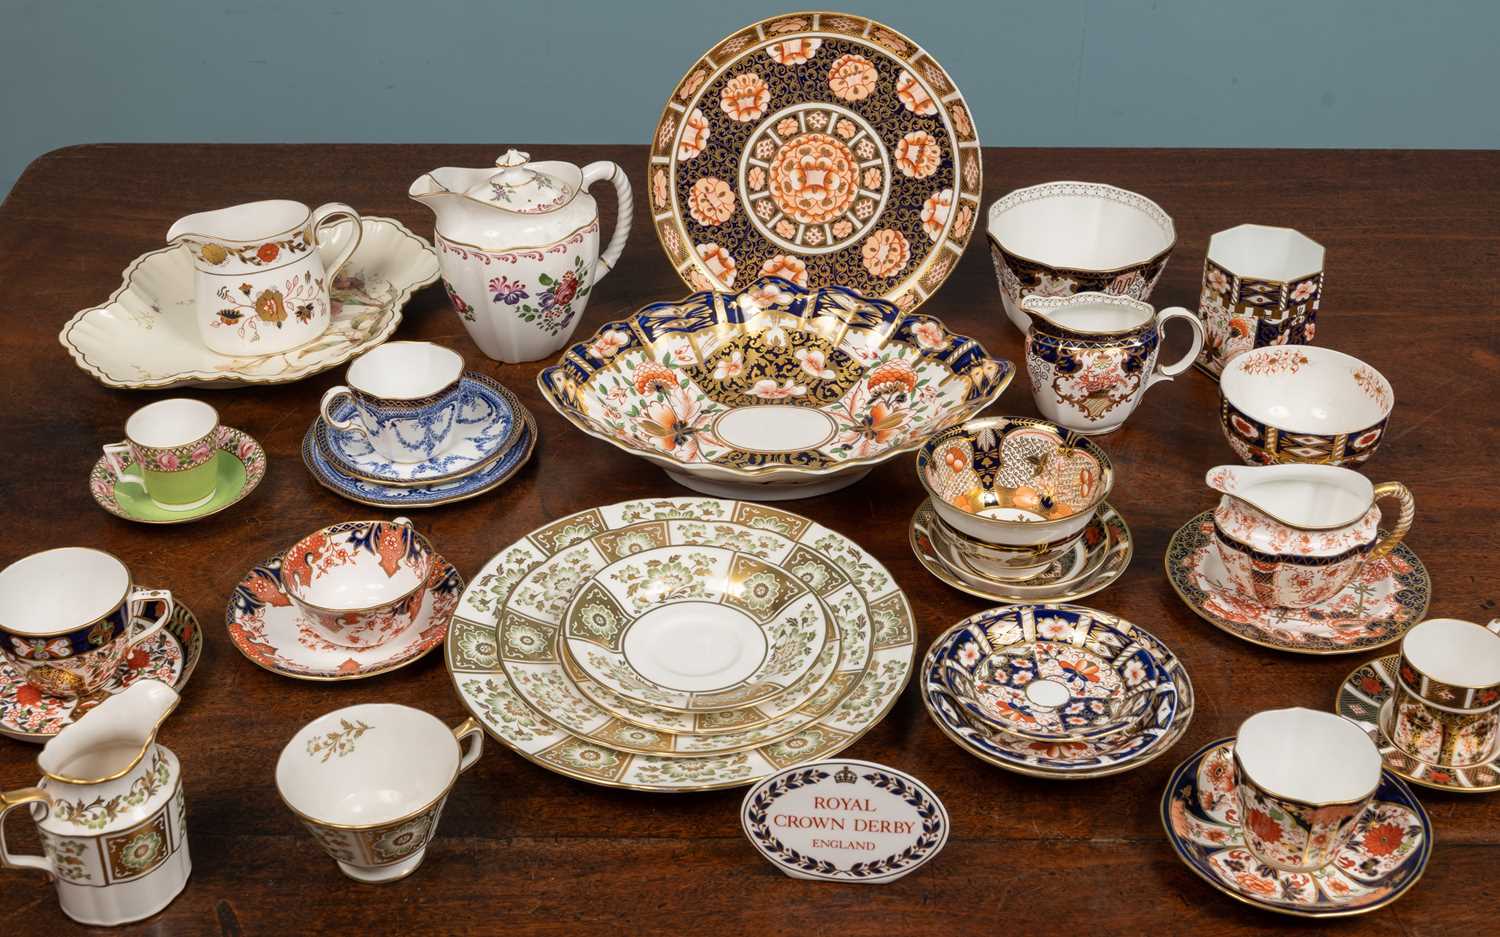 A collection of Royal Crown Derby porcelain to include Imari patterned cups and saucers, three sugar